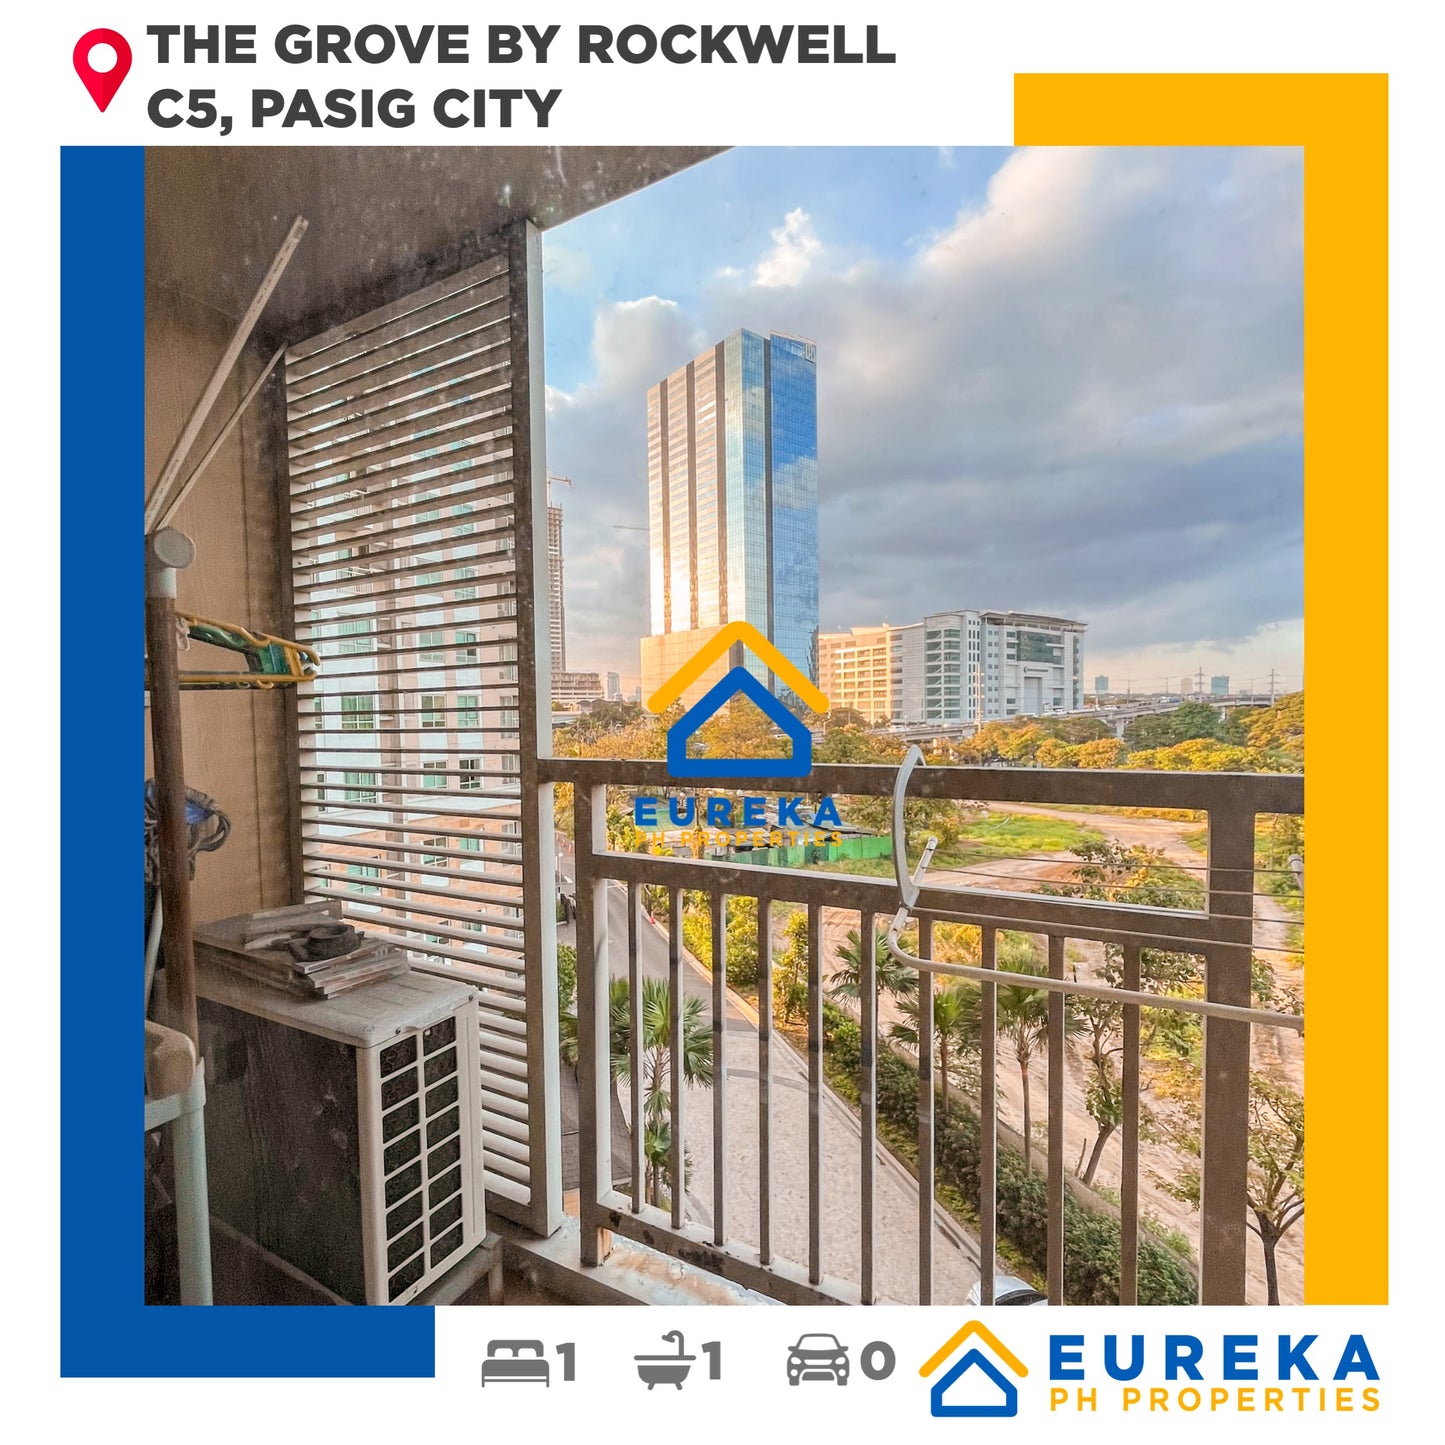 43 sqm 1BR unit without parking at the Grove by Rockwell.